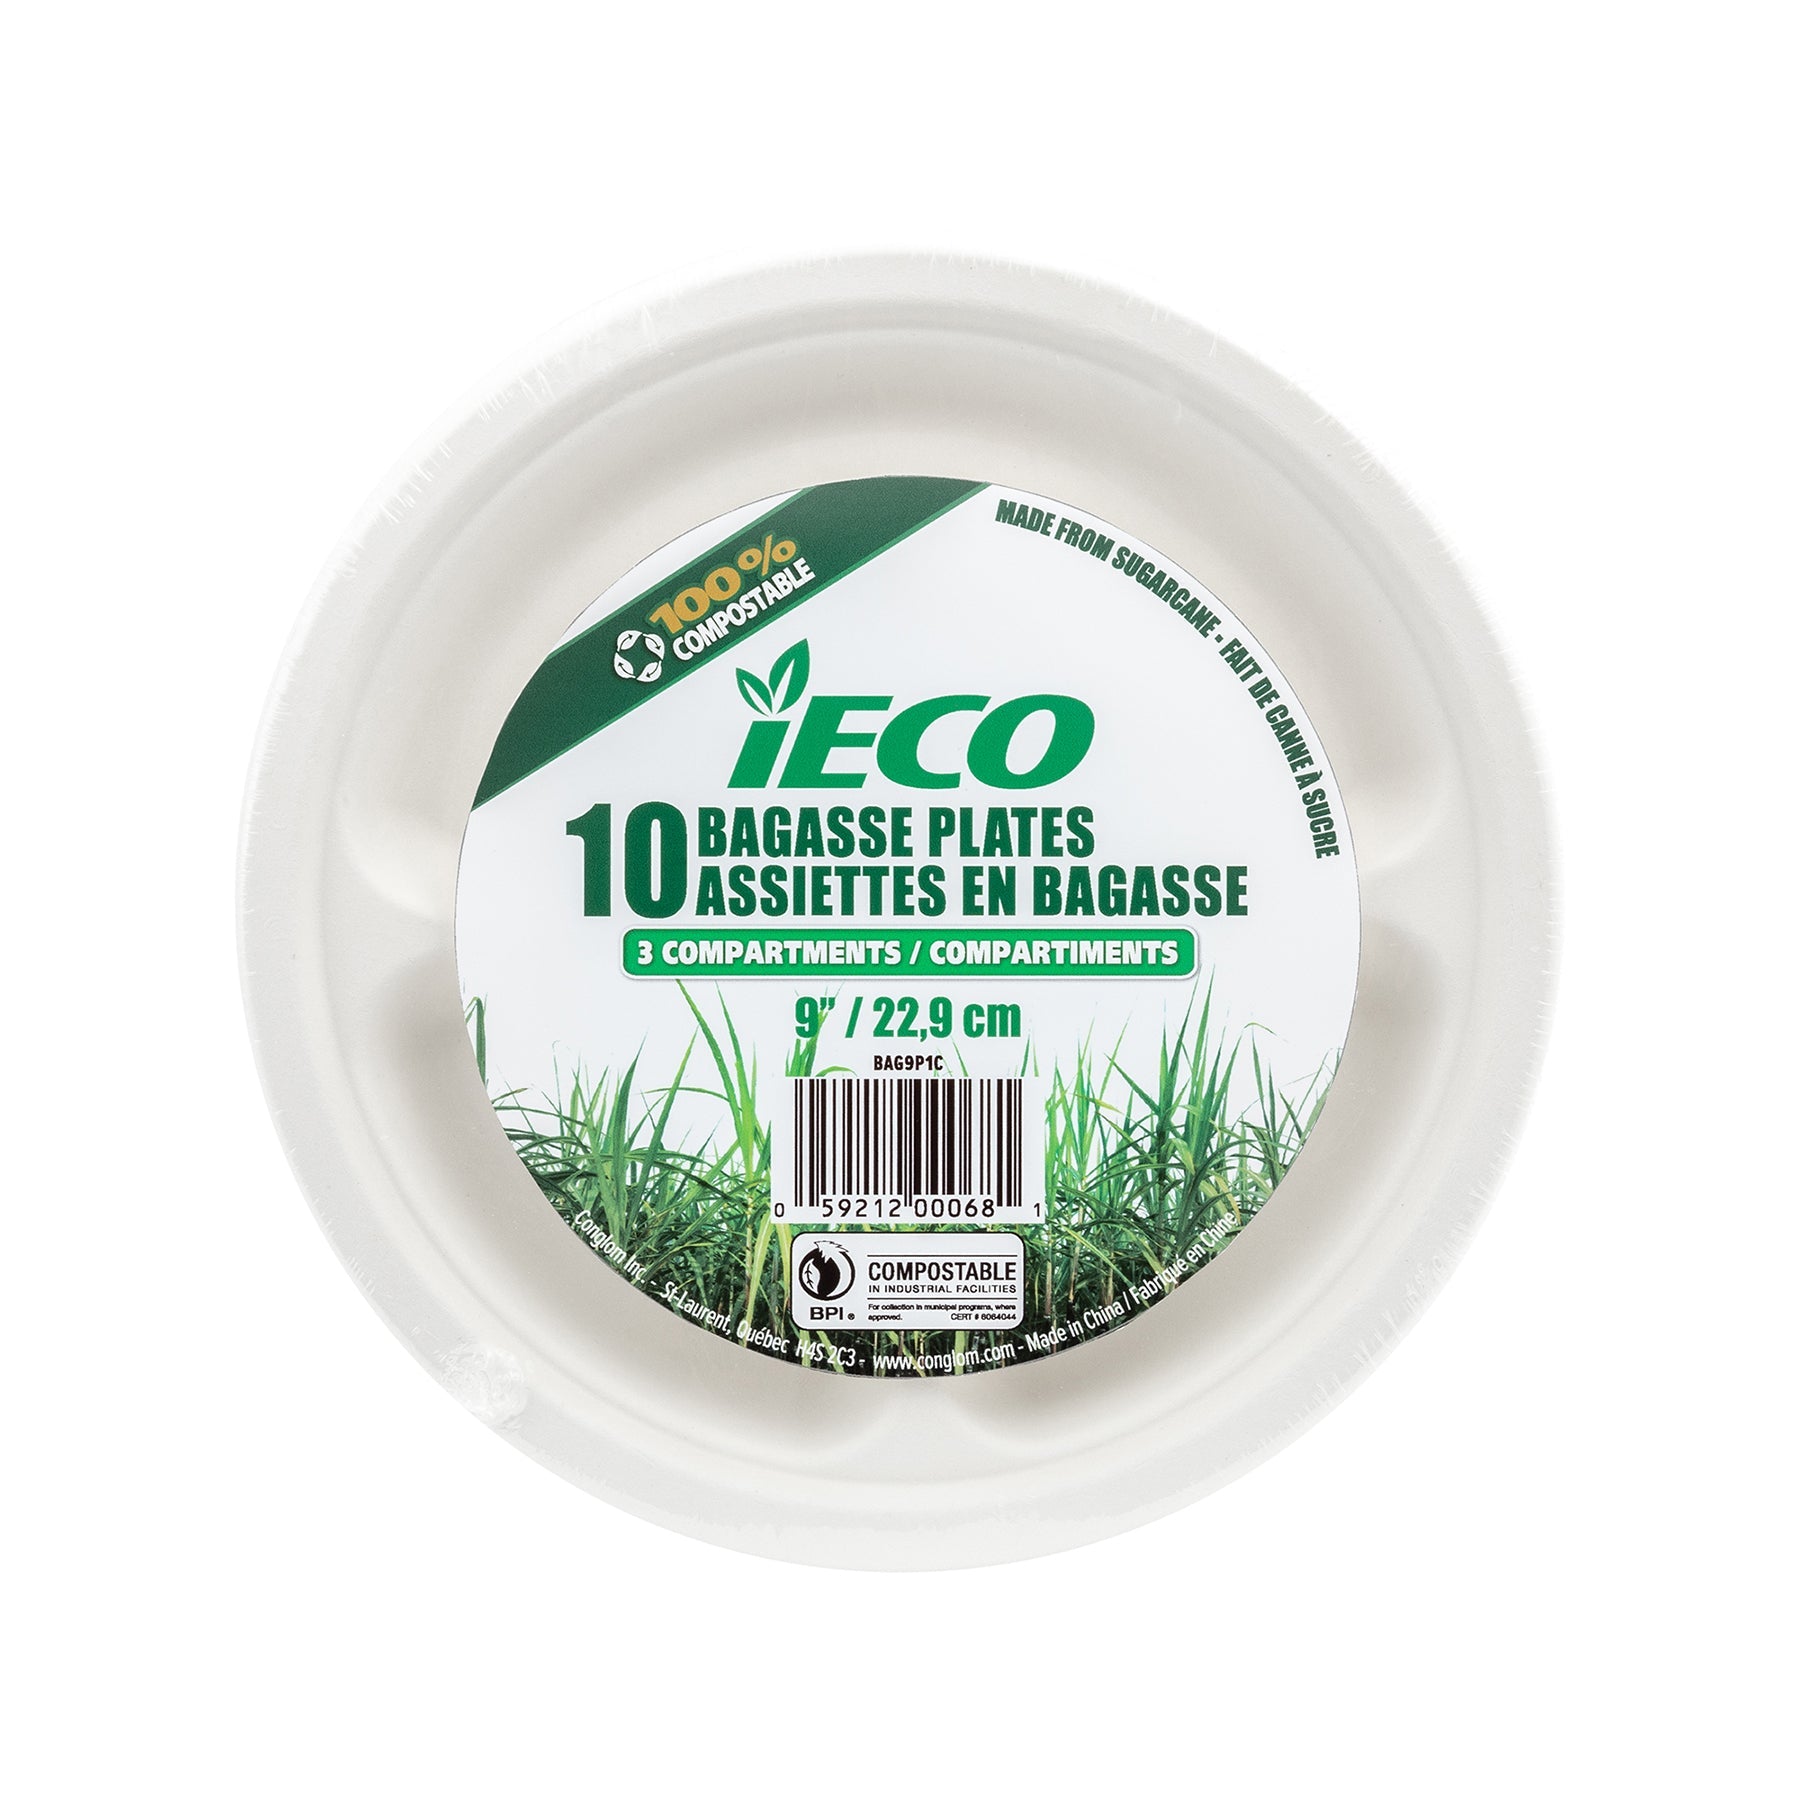 iEco 10 Bagasse Plates with 3 Compartments 9in